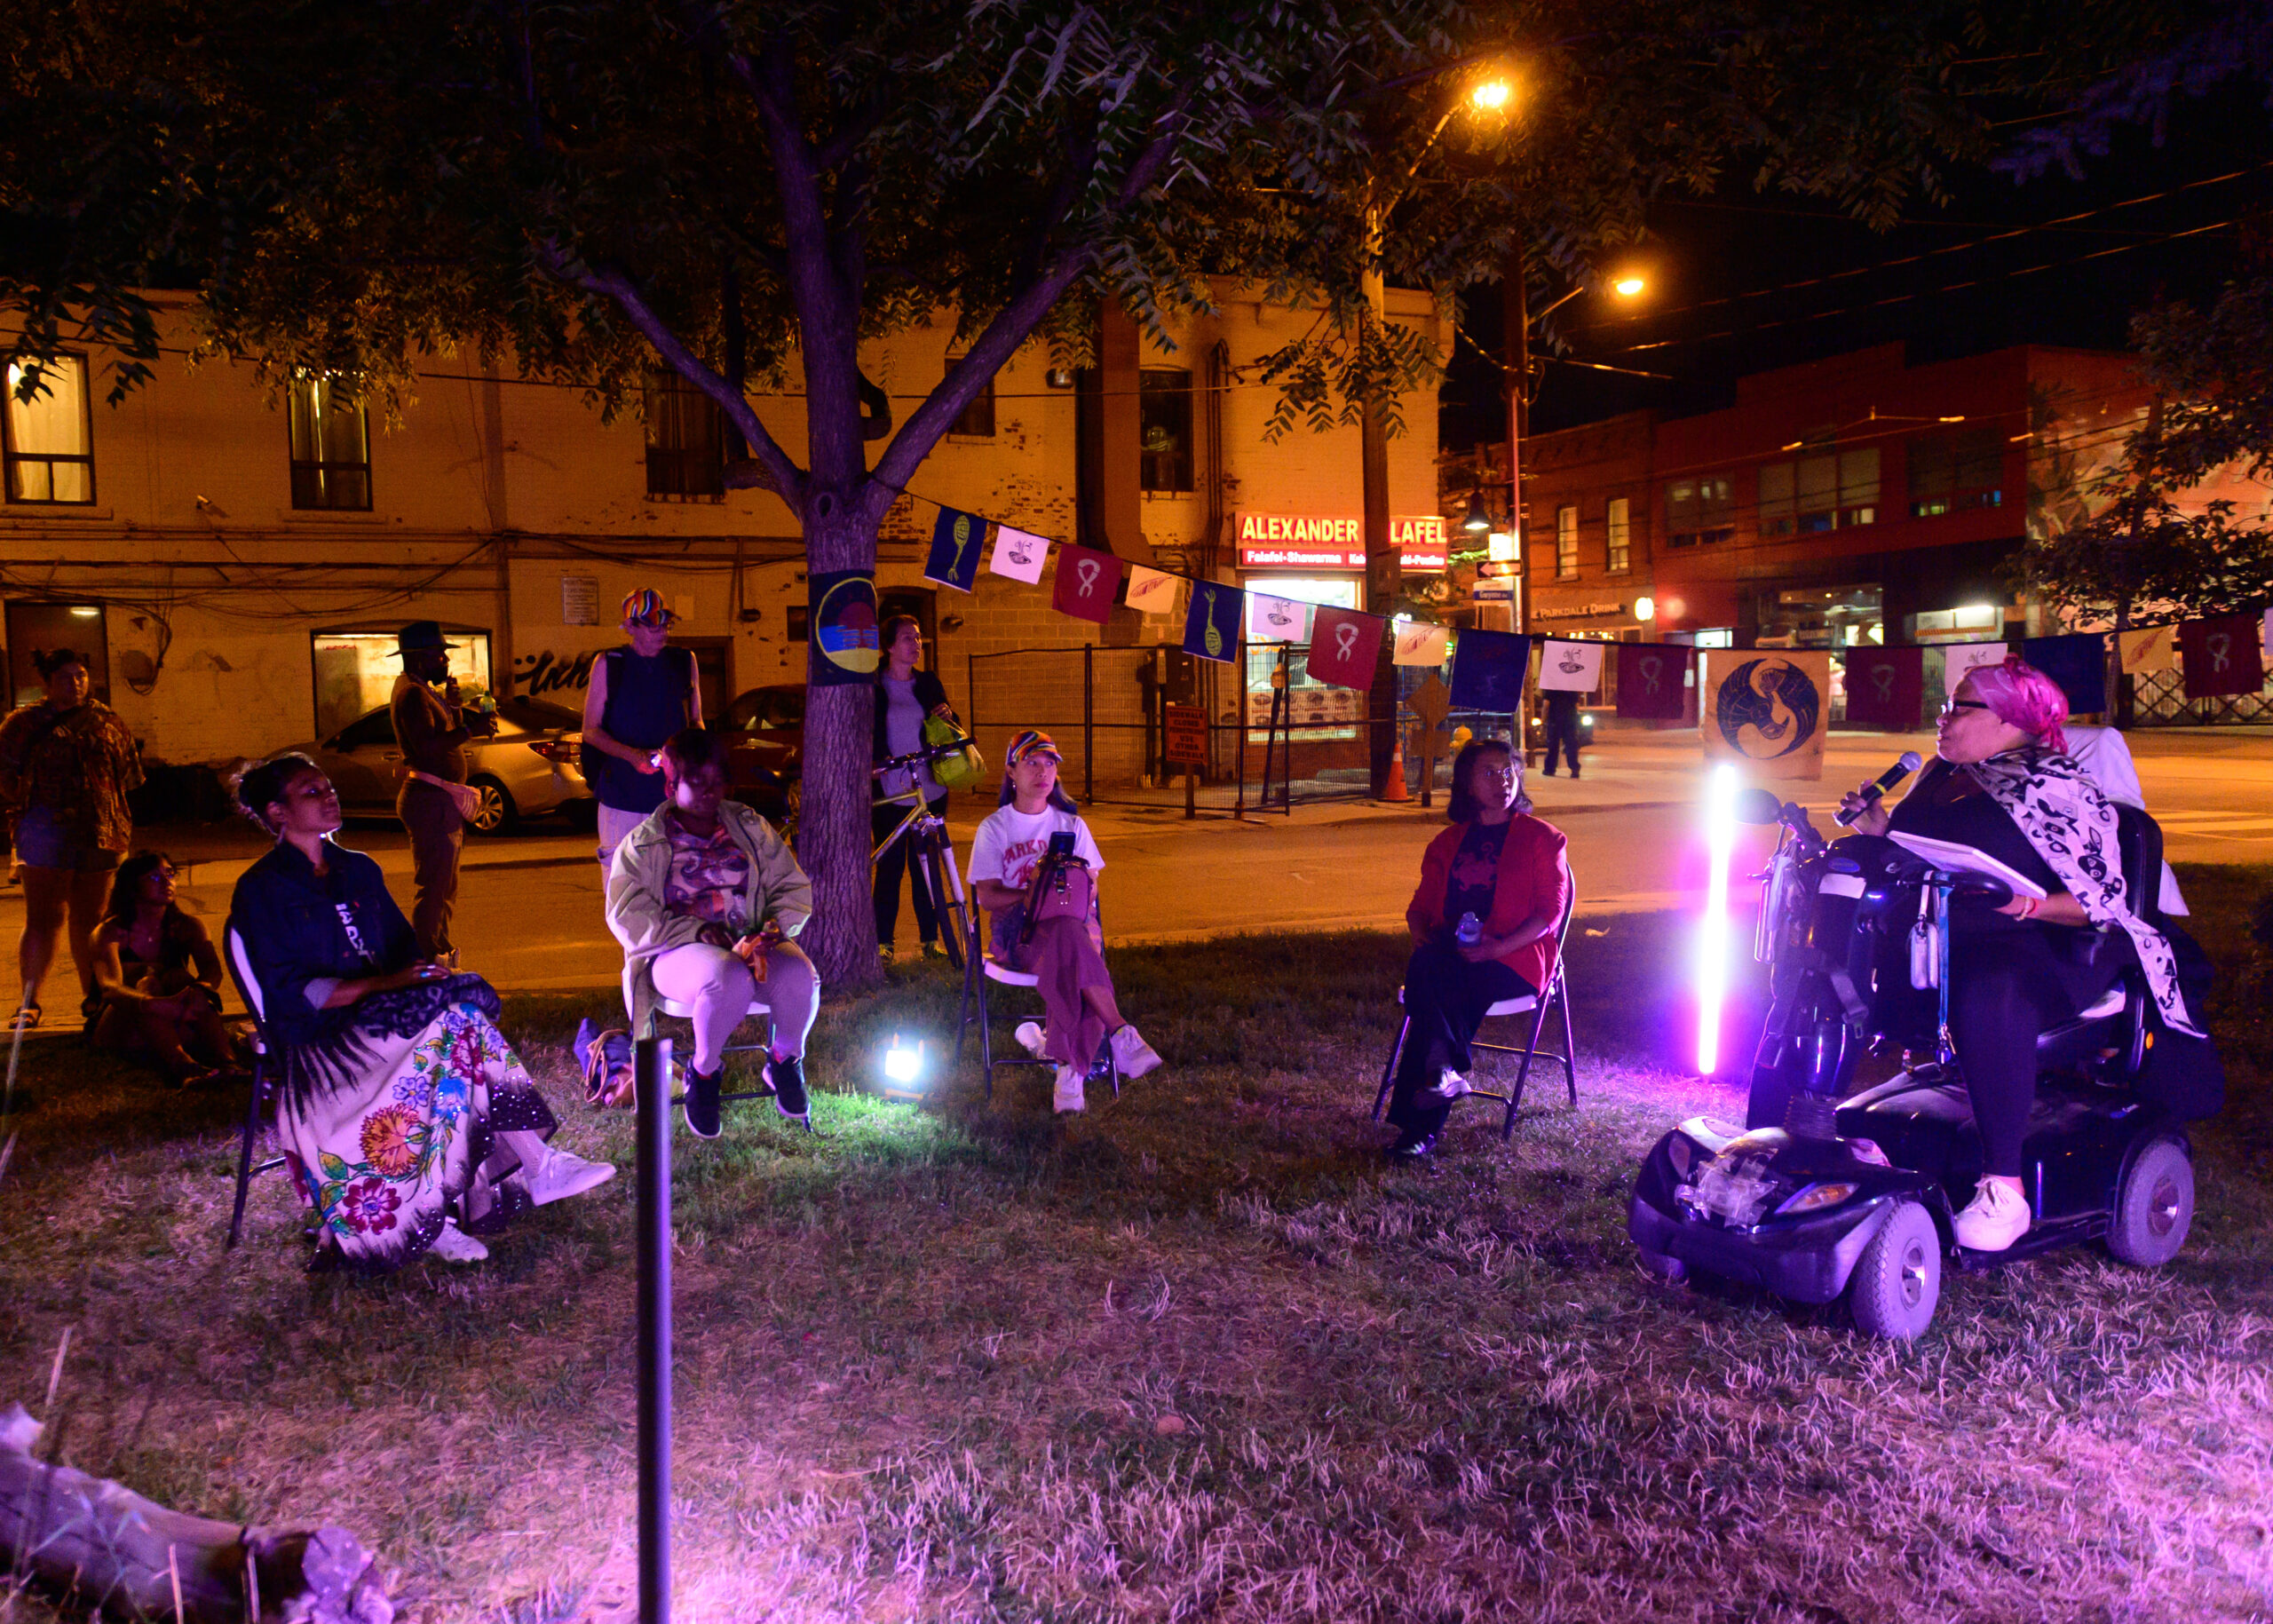 Five performers in a street-side park sit in semi-circle, lit by a purple glow. One of them is in a motorized chair and speaking into a microphone. A line of flags hangs behind them.